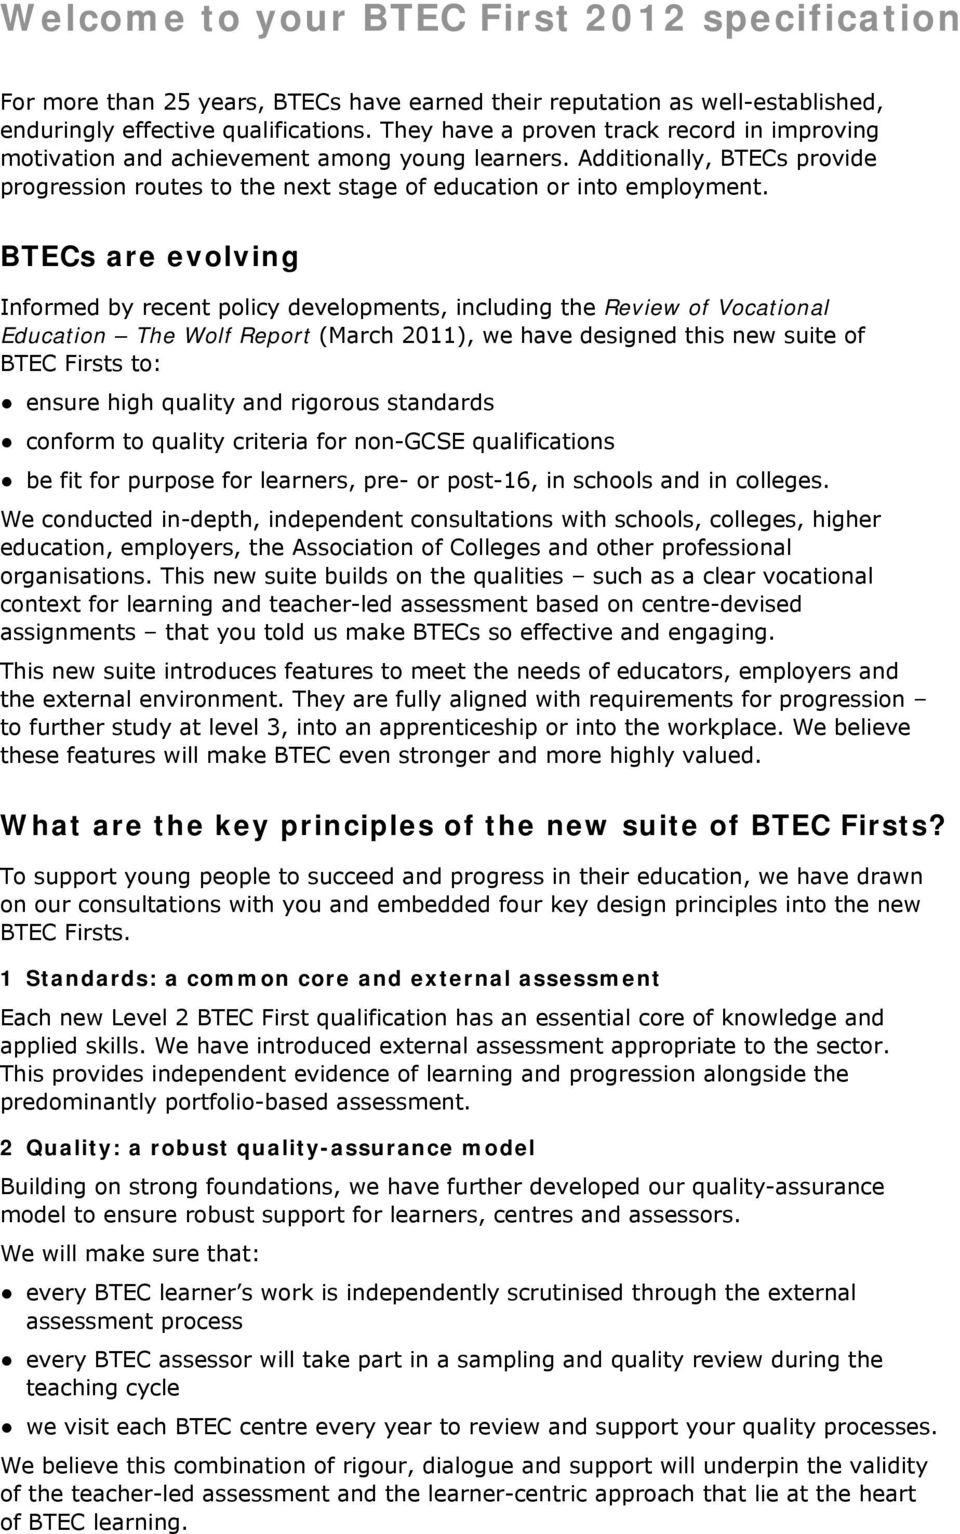 BTECs are evolving Informed by recent policy developments, including the Review of Vocational Education The Wolf Report (March 2011), we have designed this new suite of BTEC Firsts to: ensure high